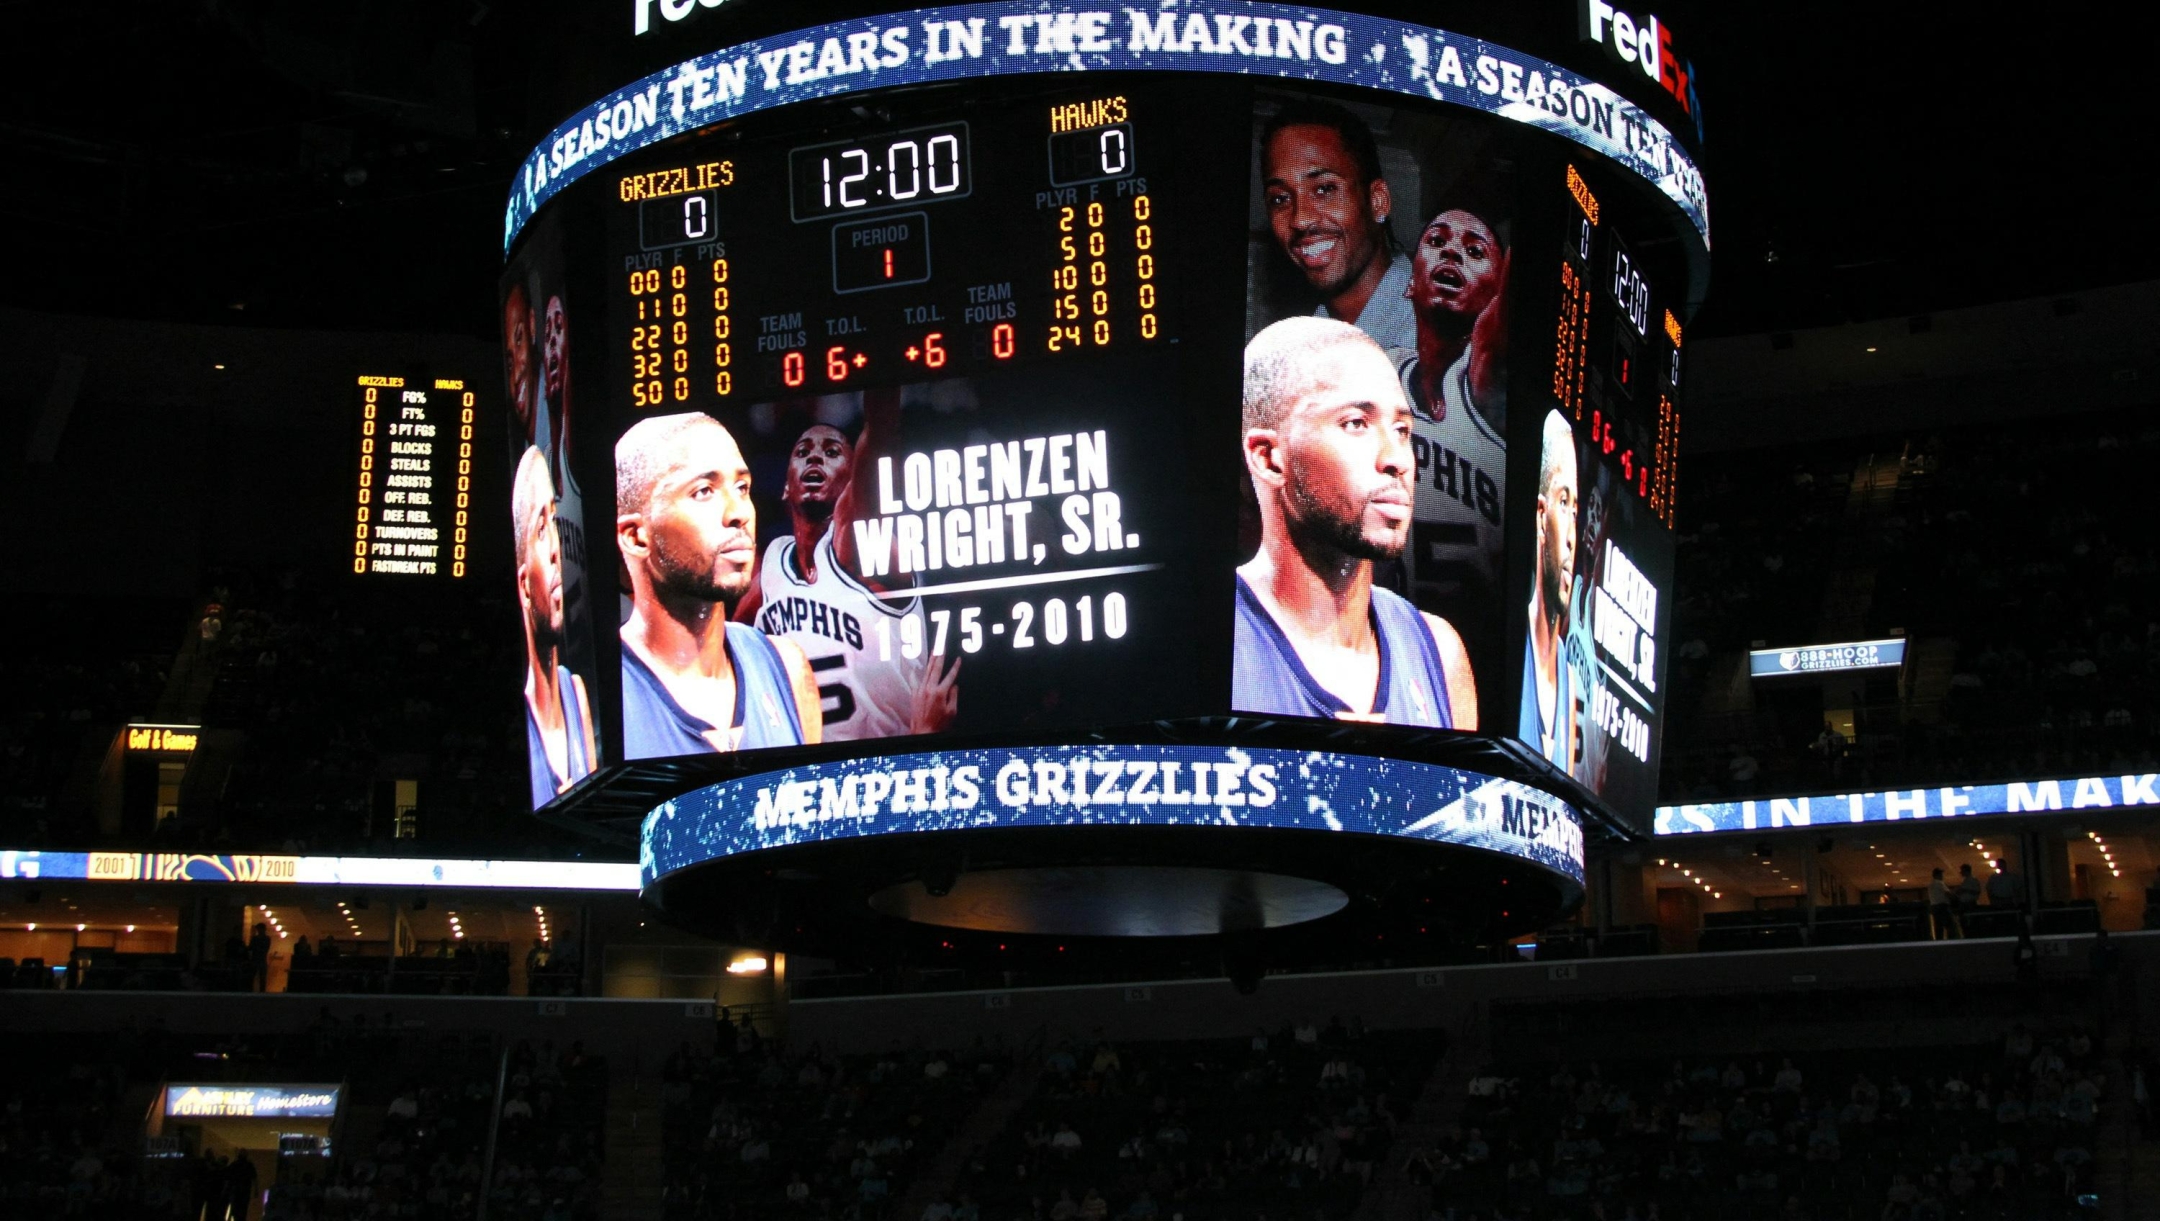 MEMPHIS, TN - OCTOBER 27: The Memphis Grizzlies remember former player Lorenzen Wright through a moment of silence before their opening night game against the Atlanta Hawks October 27, 2010 at the FedExForum in Memphis, Tennessee. NOTE TO USER: User expressly acknowledges and agrees that, by downloading and or using this photograph, User is consenting to the terms and conditions of the Getty Images License Agreement. Mandatory Copyright Notice: Copyright 2010 NBAE   Joe Murphy/NBAE via Getty Images/AFP (Photo by JOE MURPHY / NBAE / Getty Images / Getty Images via AFP)